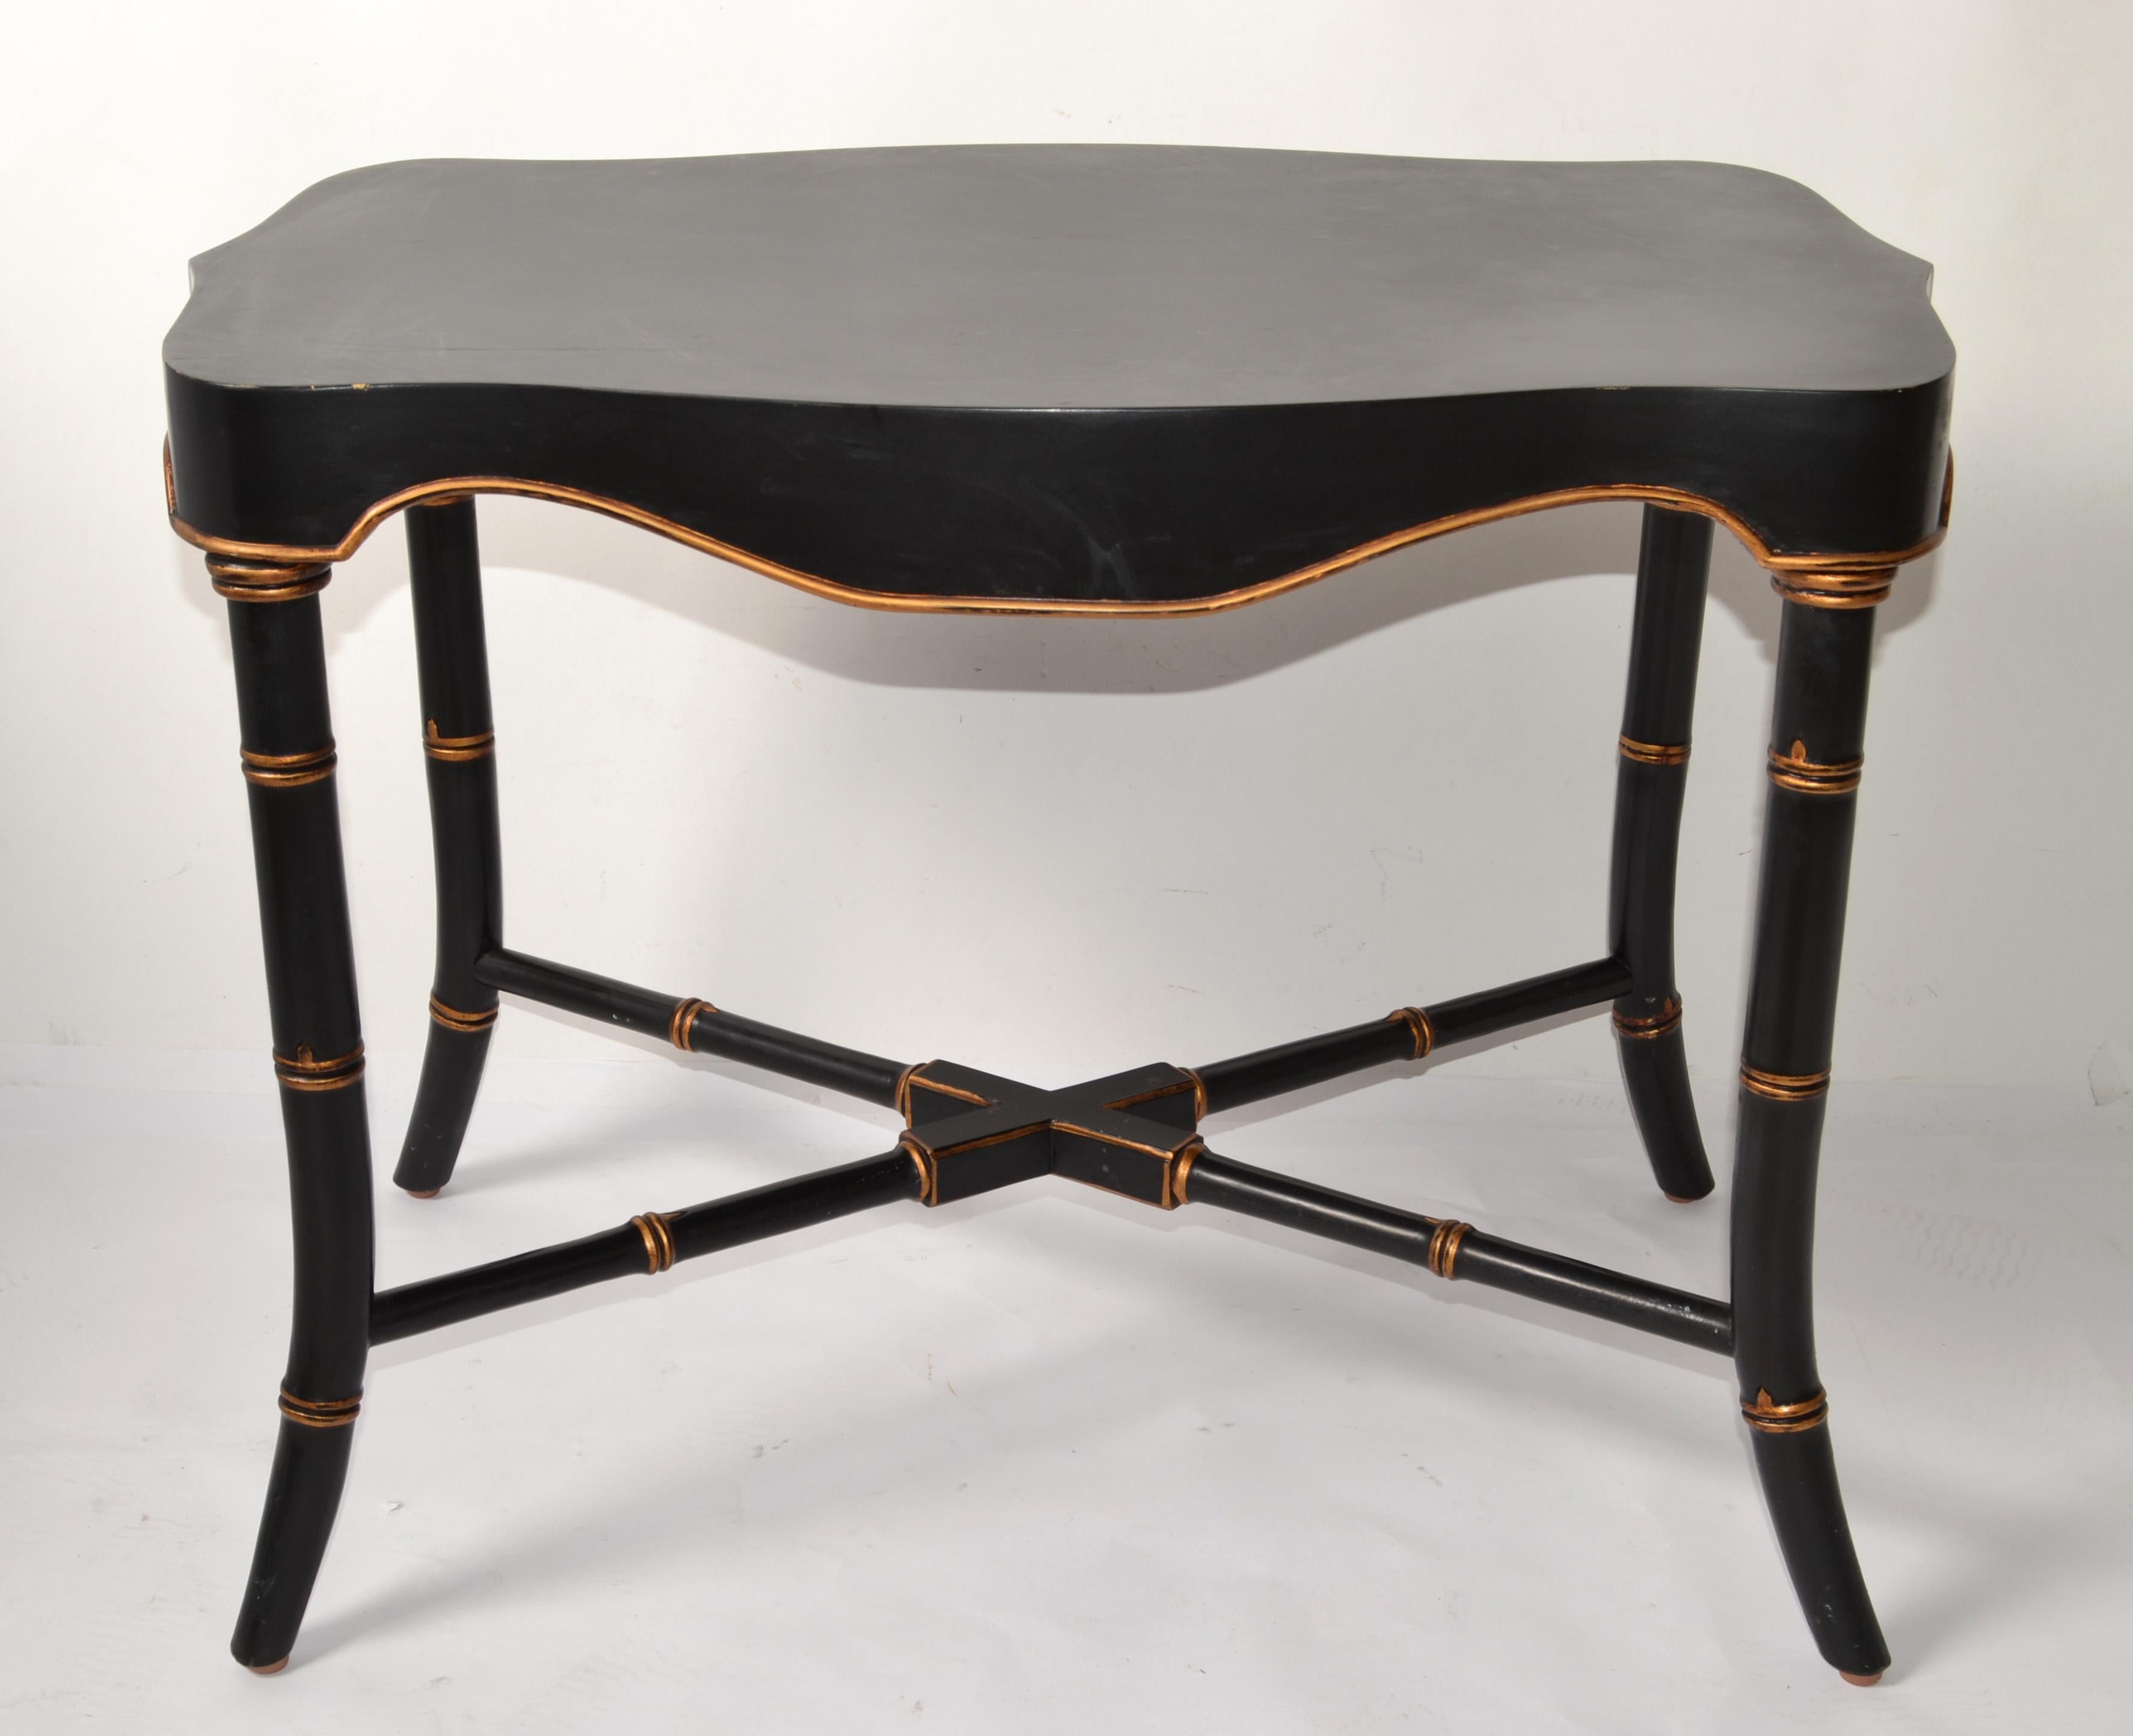 Victorian Mid-20th Century Black Gold Finish Accent Table Faux Bamboo Cross Base For Sale 11